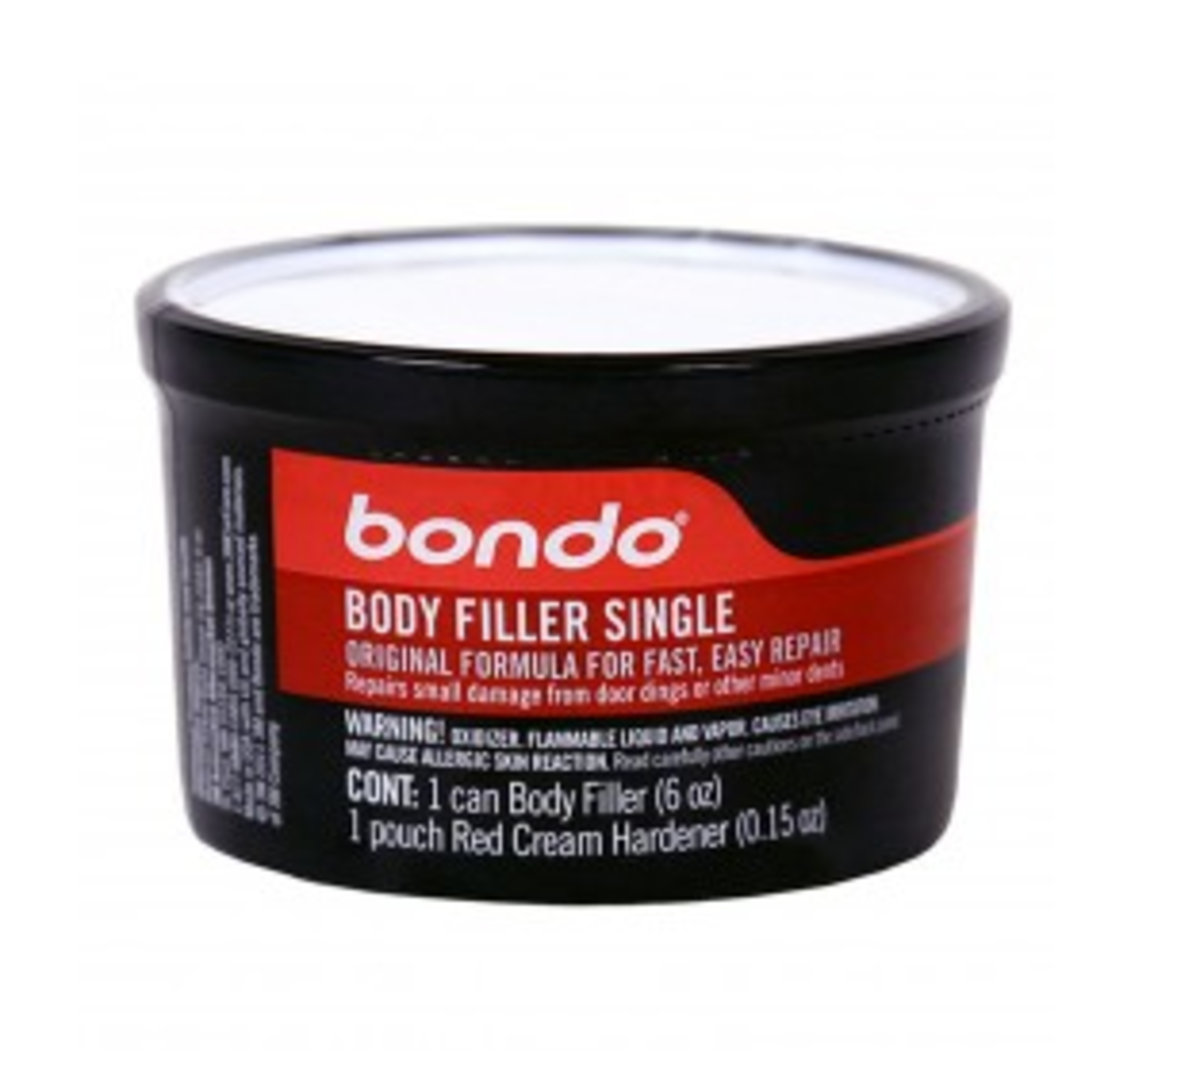 Bondo Introduces New Single-Use Tub with Skaters in Mind - Men's Journal